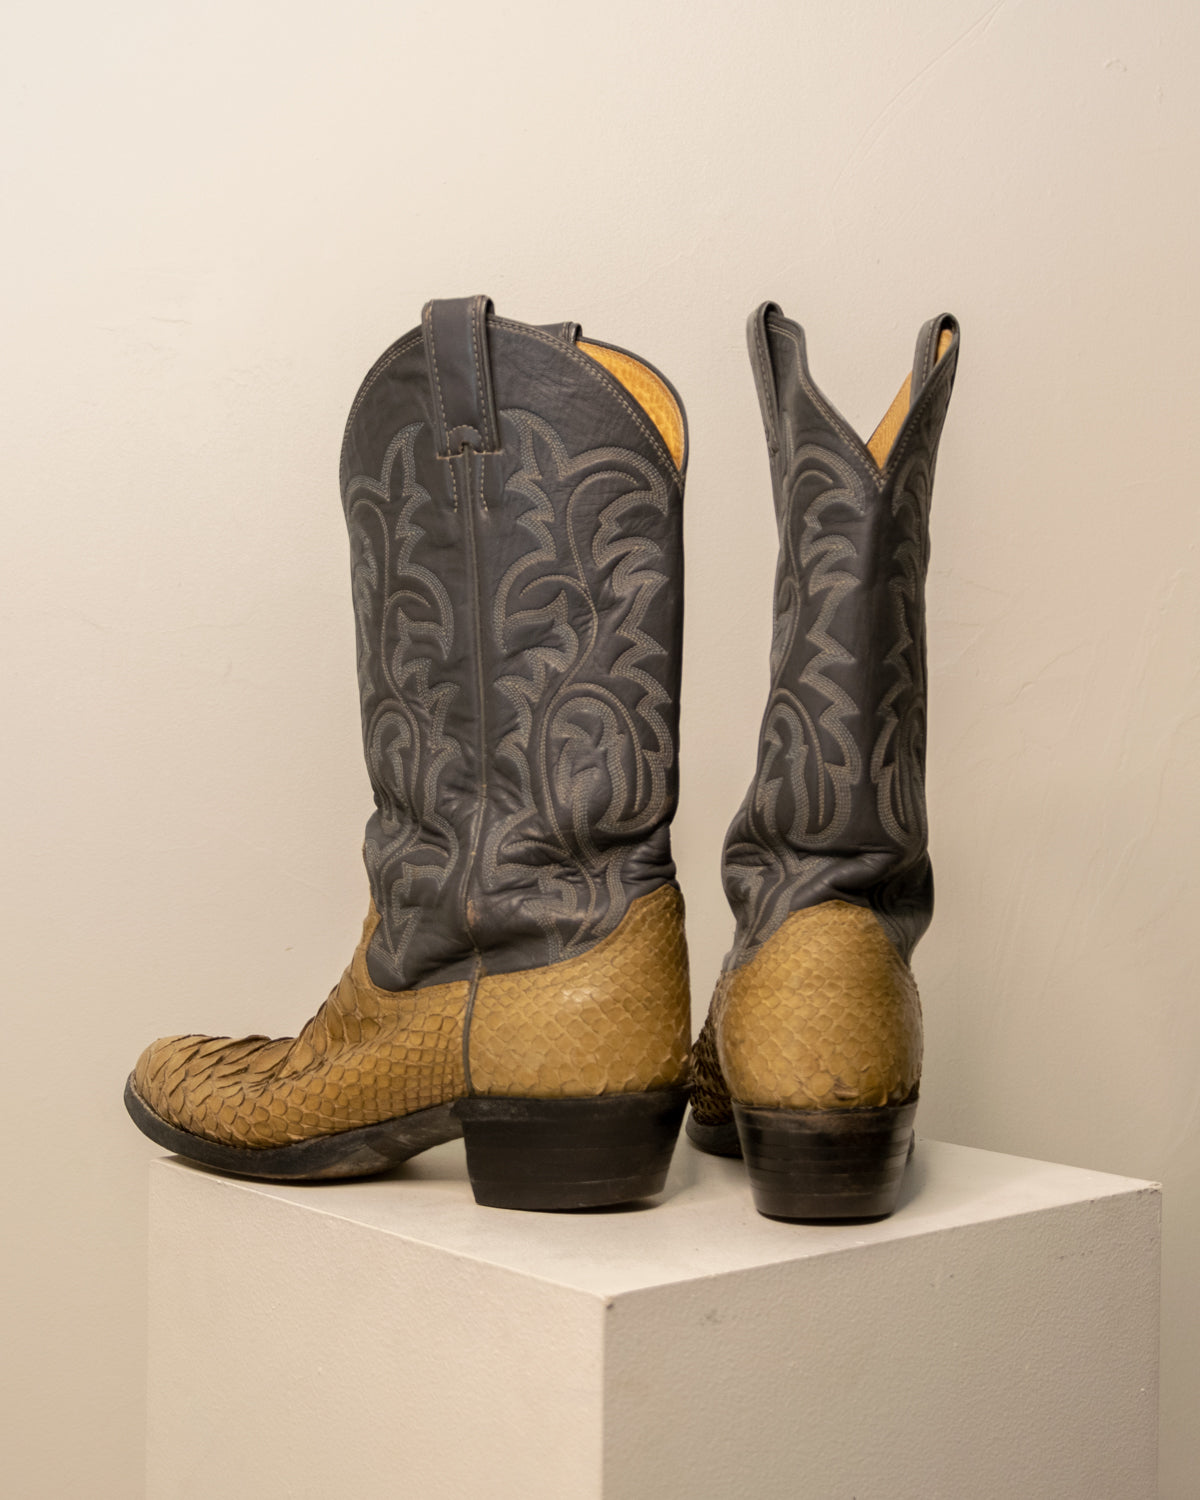 Two Tone Snakeskin Cowboy Boots 8M